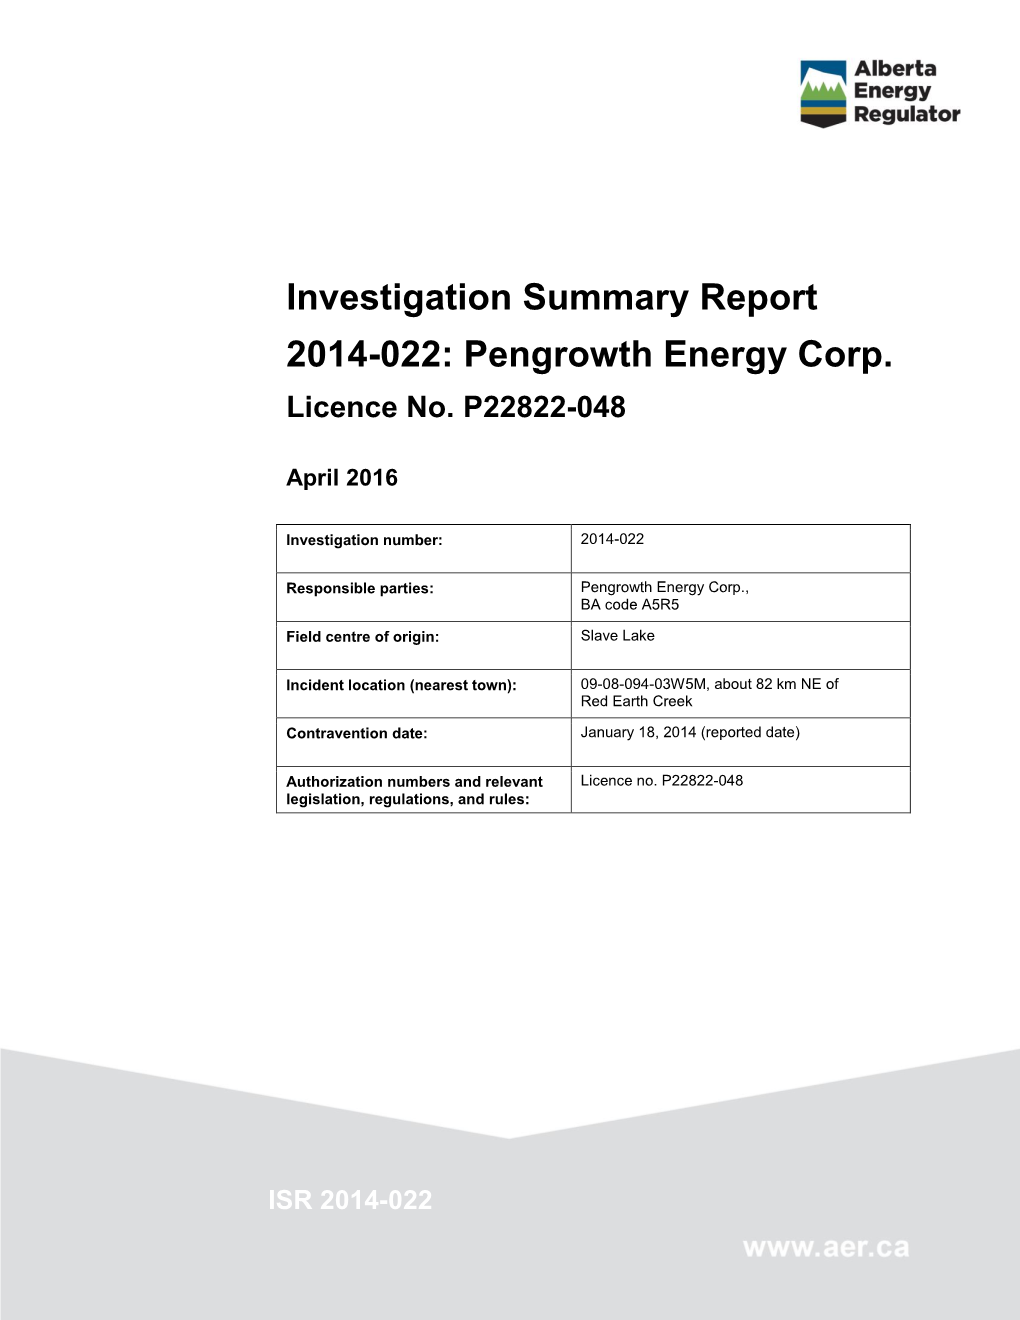 Pengrowth Energy Corp. Licence No